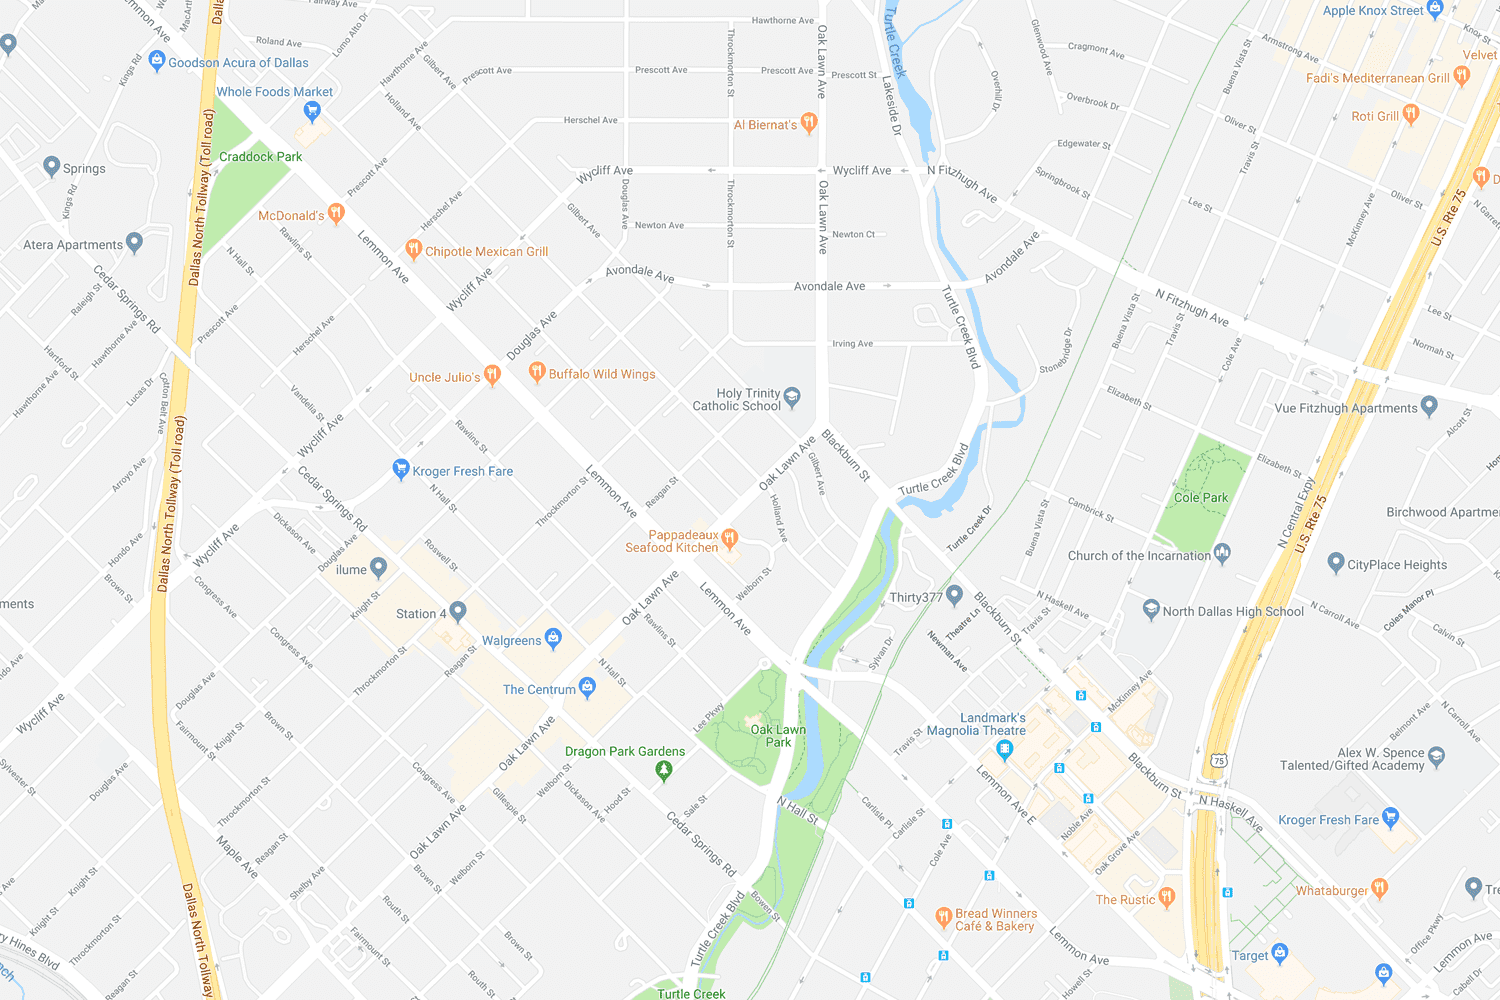 Map of Uptown Dallas location